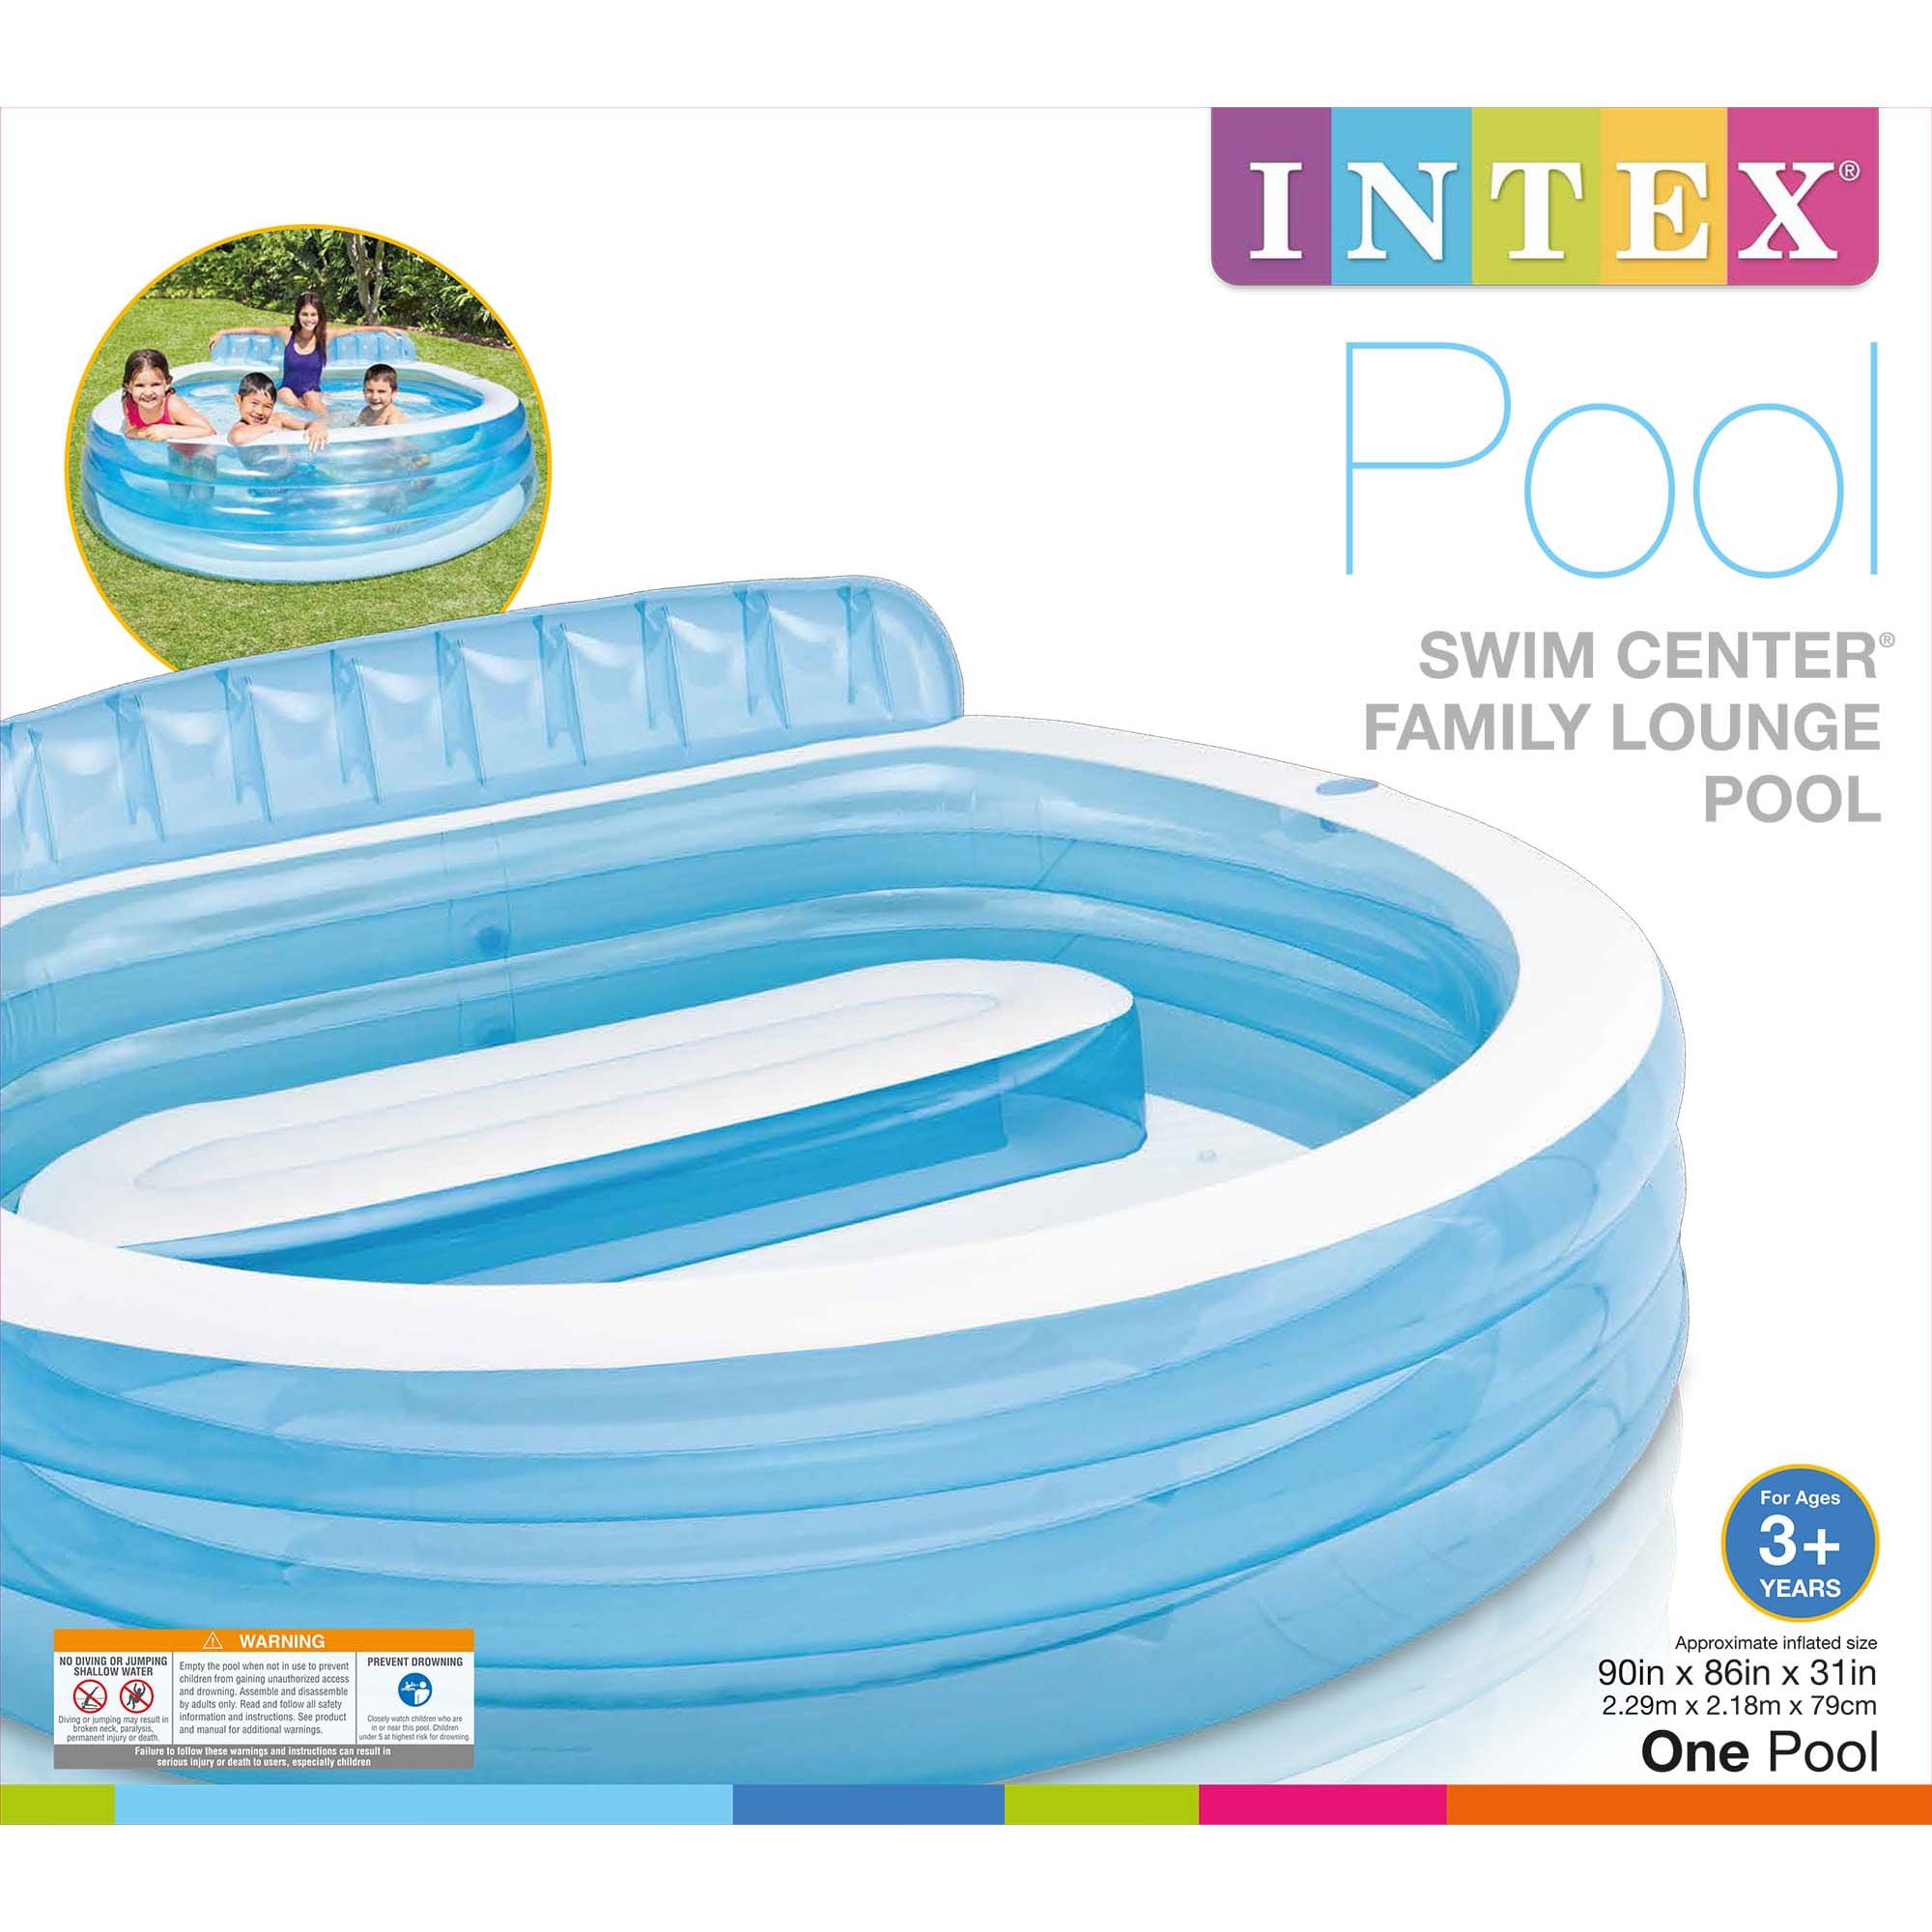 Catastrofe Vervagen Insecten tellen Intex Swim Center Round Inflatable Above Ground Family Lounge Outdoor Pool  with Seat and Backrest - Walmart.com